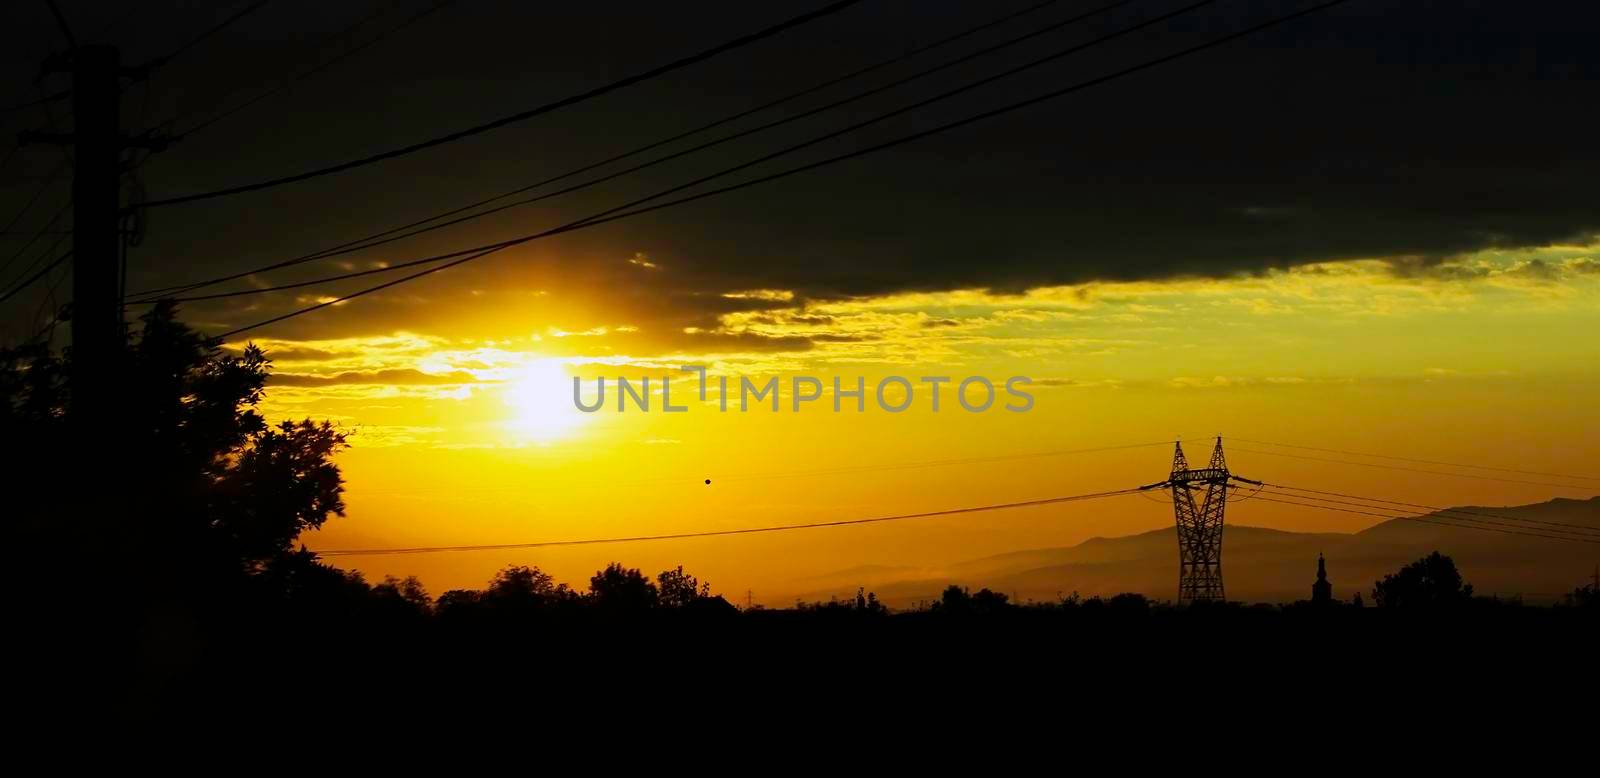 Sunrise background with power pylon and cables silhouettes